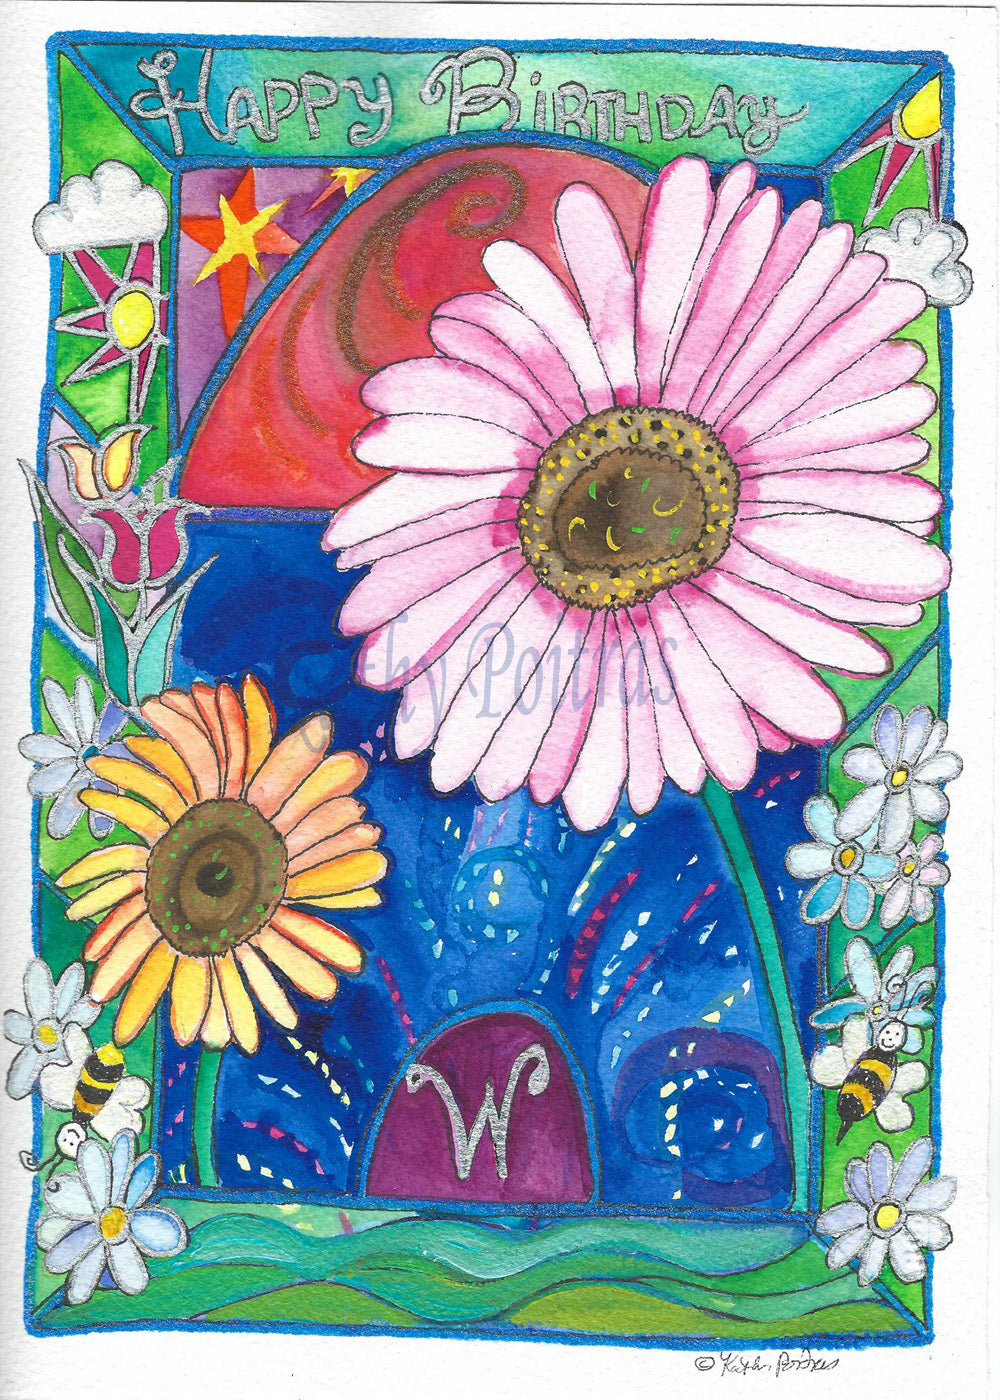 Personalized flower of the month April, Happy Birthday Card. Daisies and the letter W.   A cheerful whimsical cathedral with celebratory fireworks featuring the letter W, and daisies.  Surrounded by a border with naïve images expressing life. Happy Birthday is written on the top. 